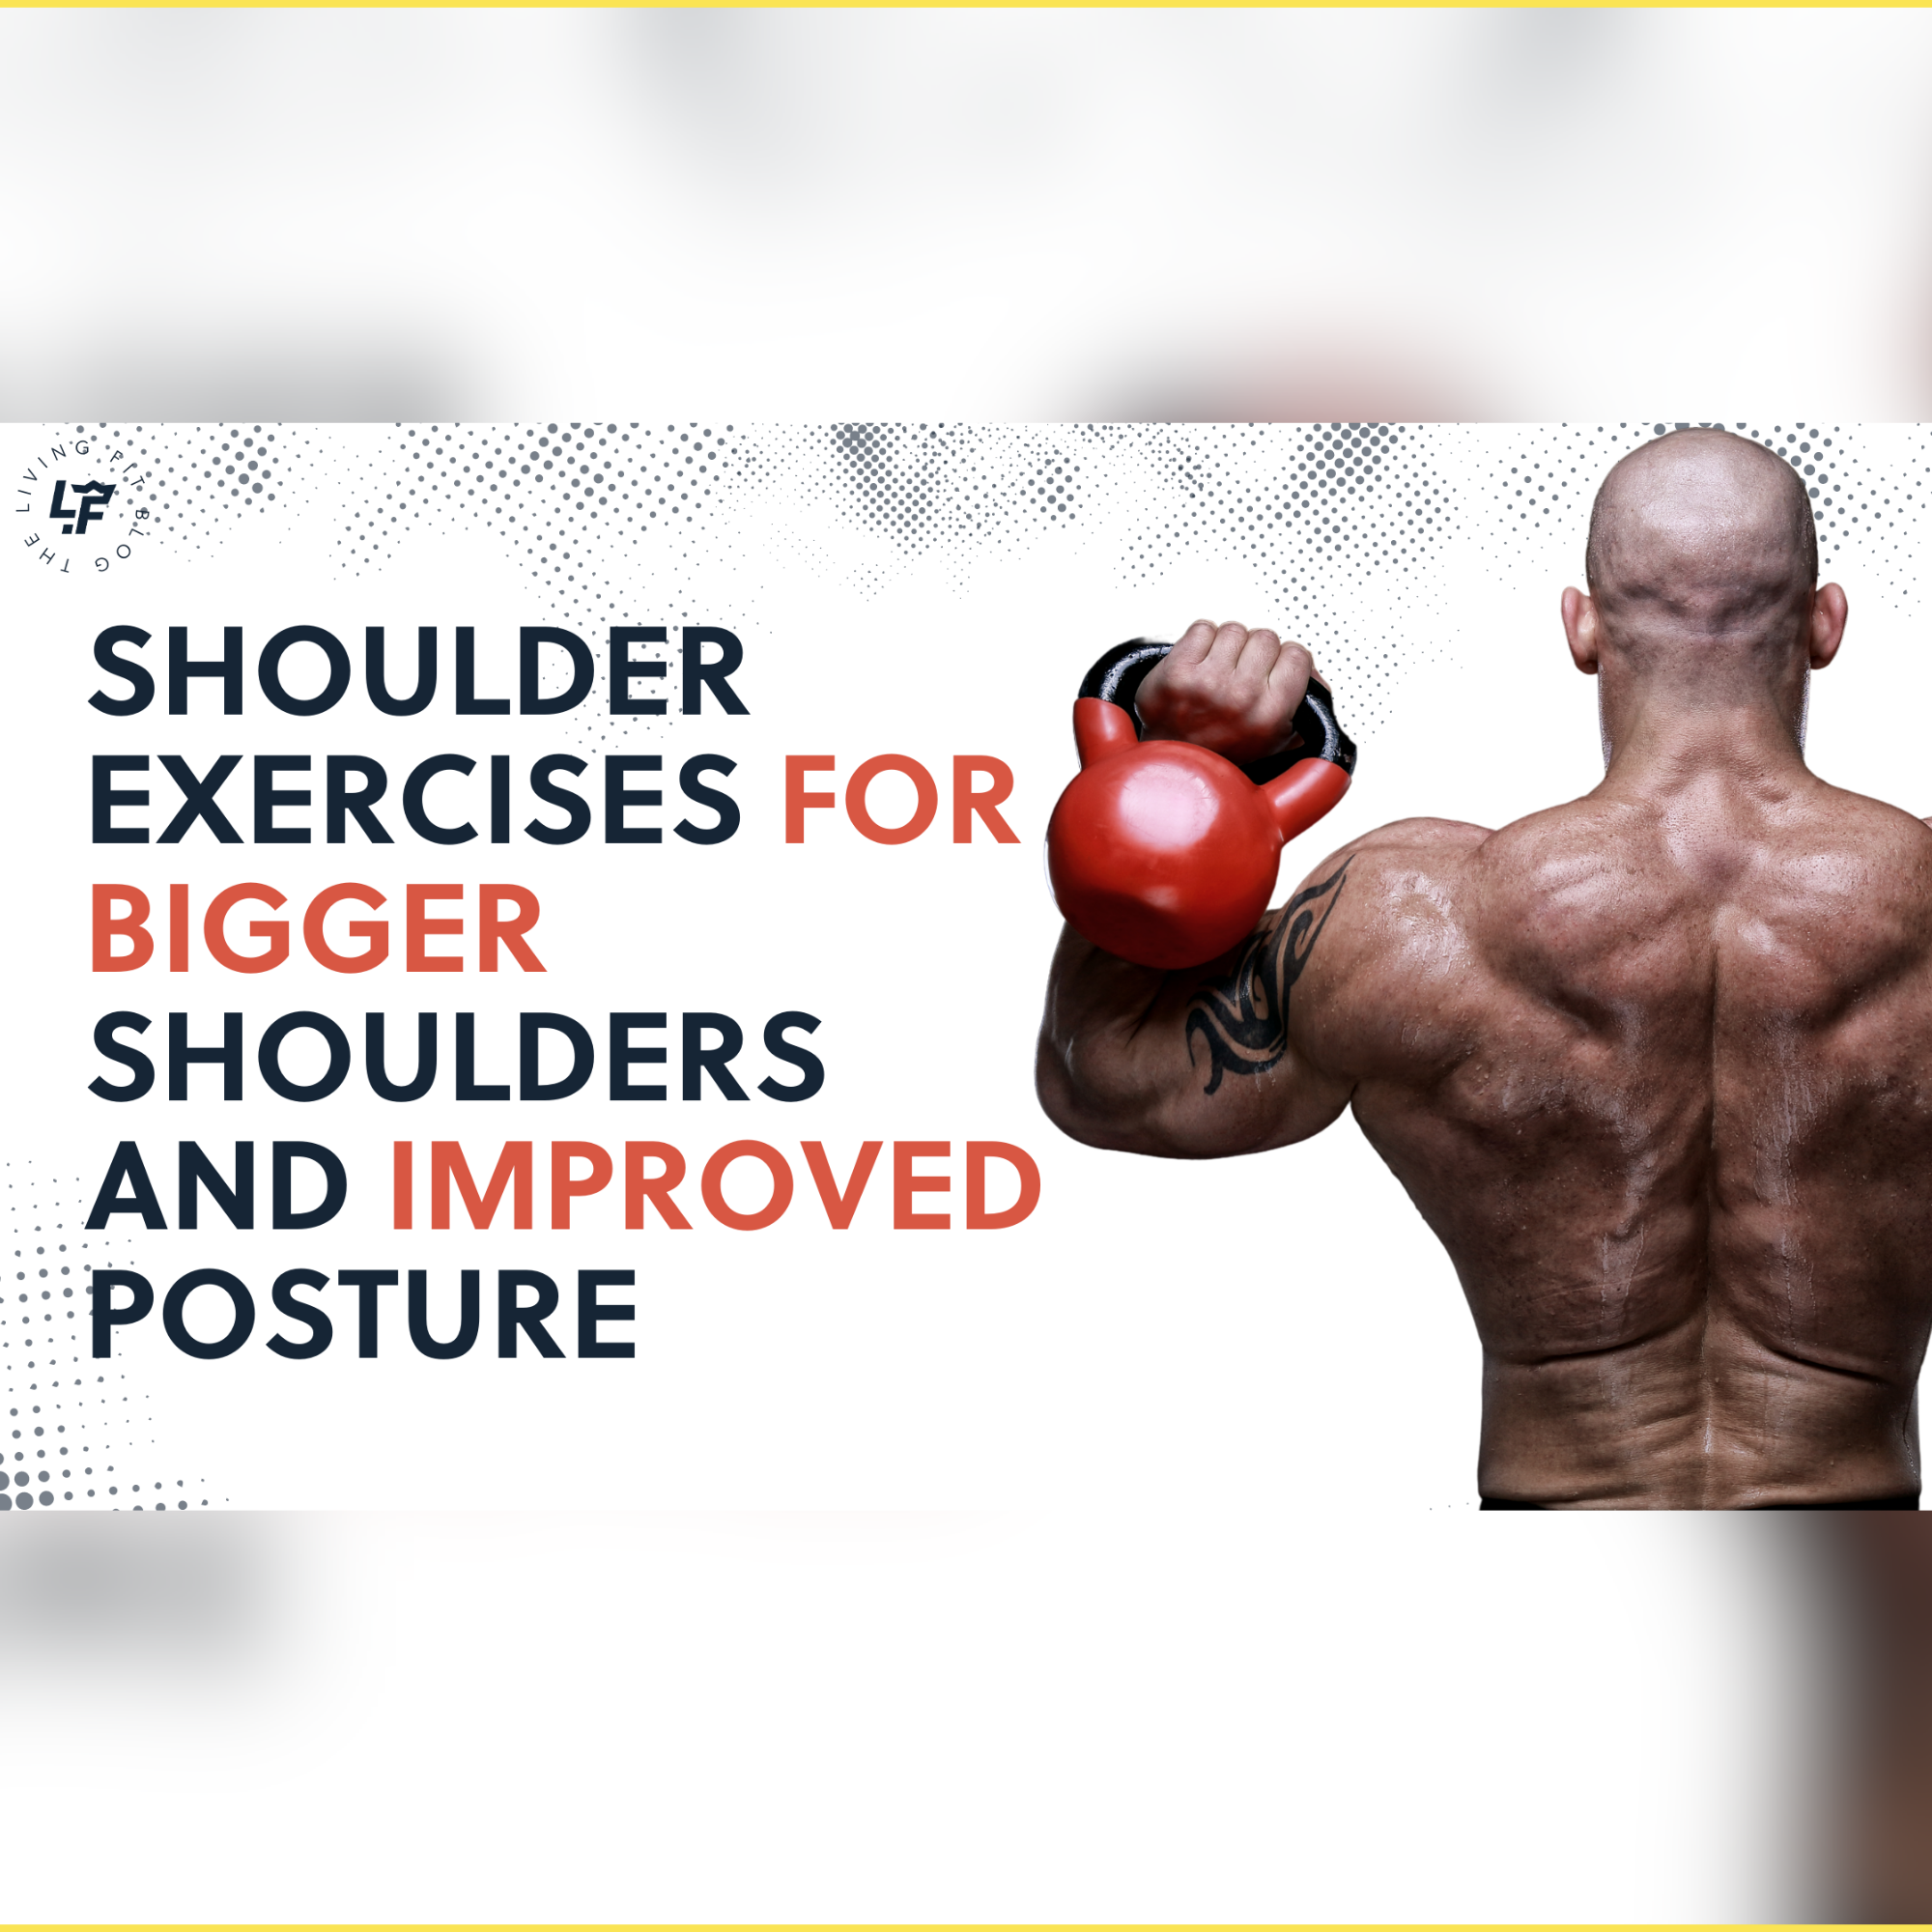 How to Improve Posture: 3 Exercises to Build Big Shoulders and a